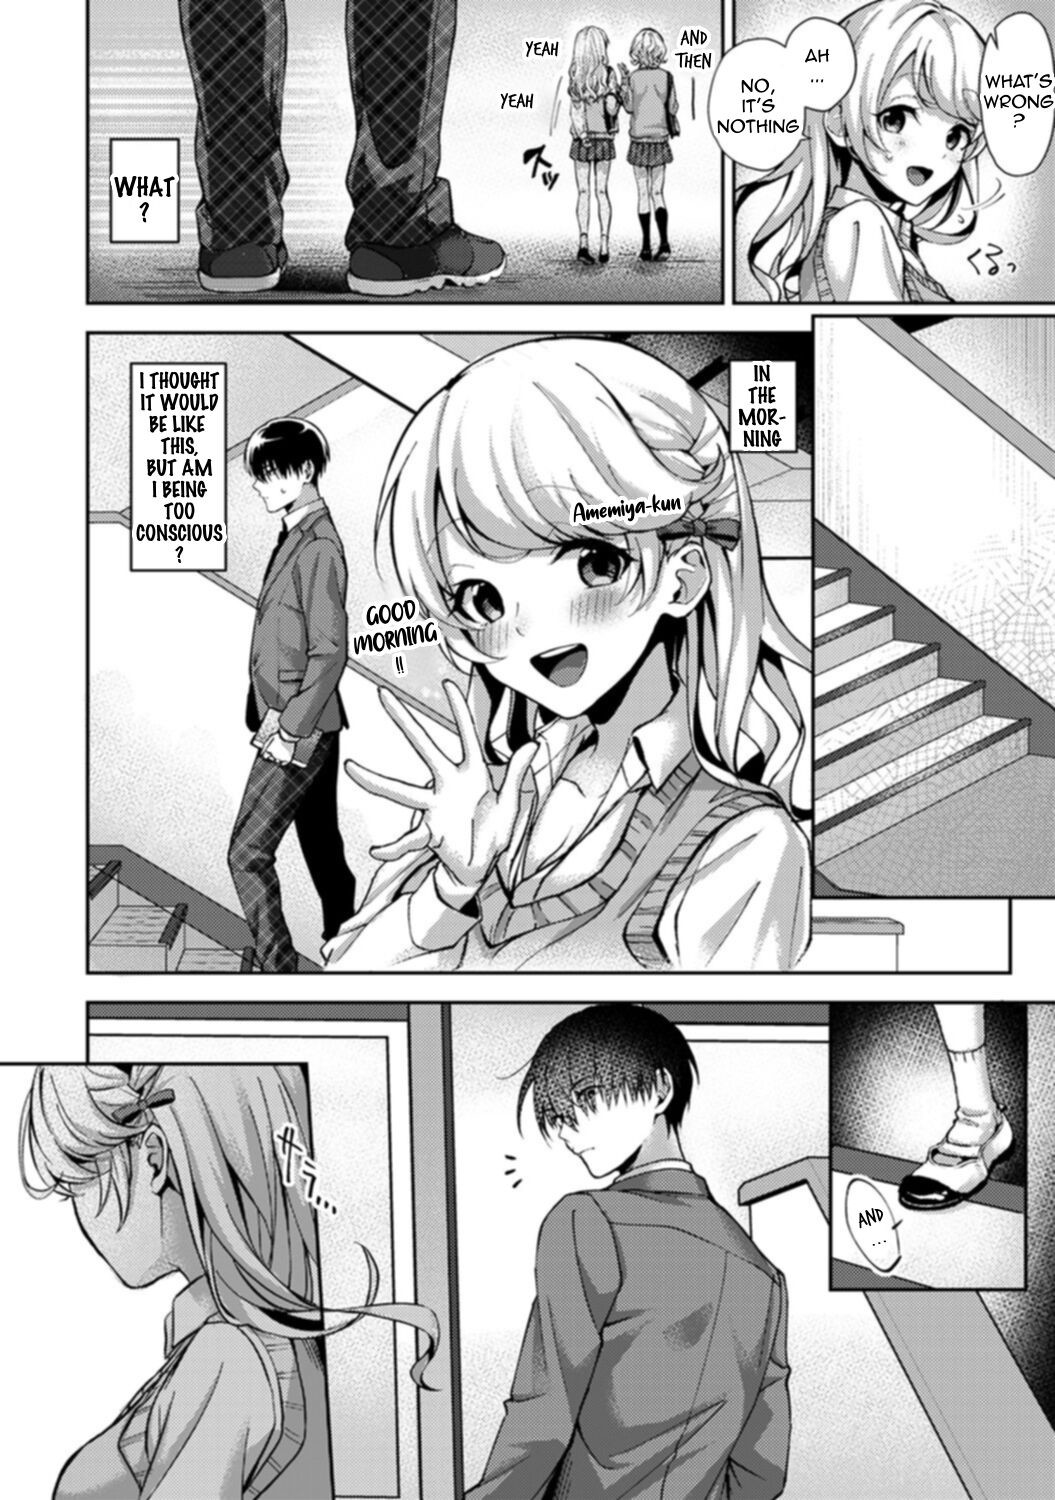 Hentai Manga Comic-My Classmate Is a Young Seductress Who Only Has Eyes For Me-Chapter 2-3